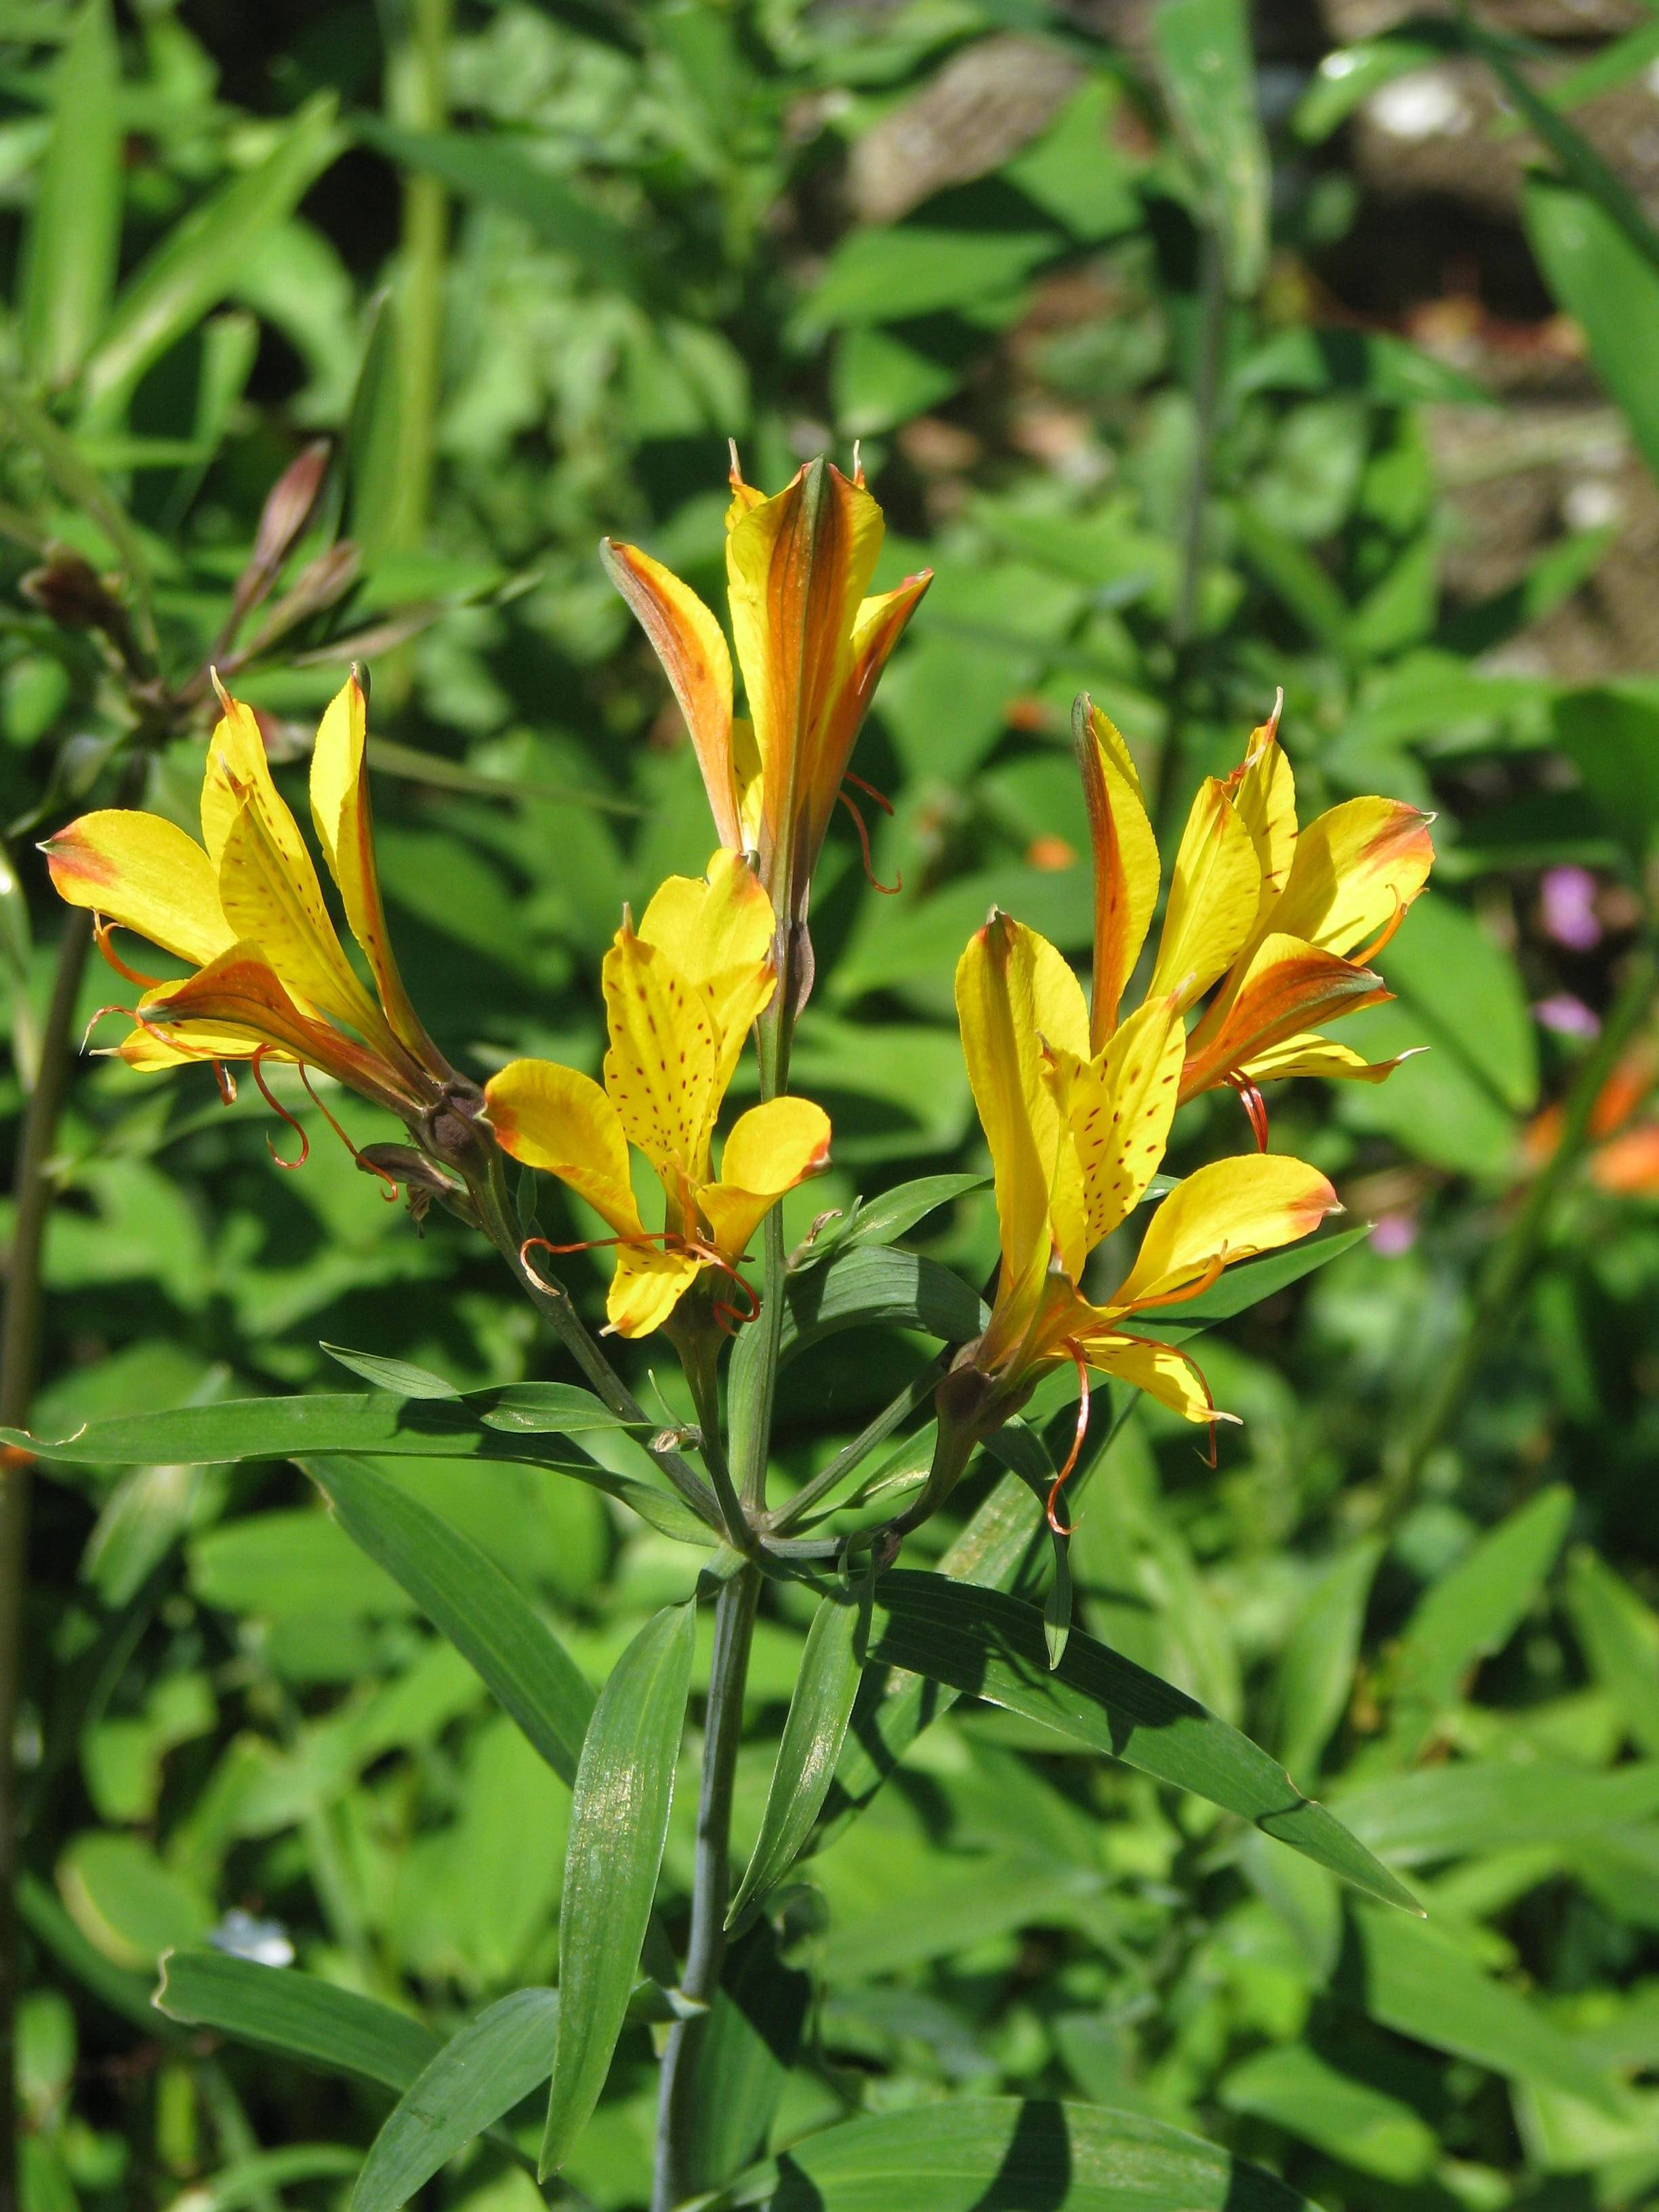 yellow-orange flowers with green leaves and stems